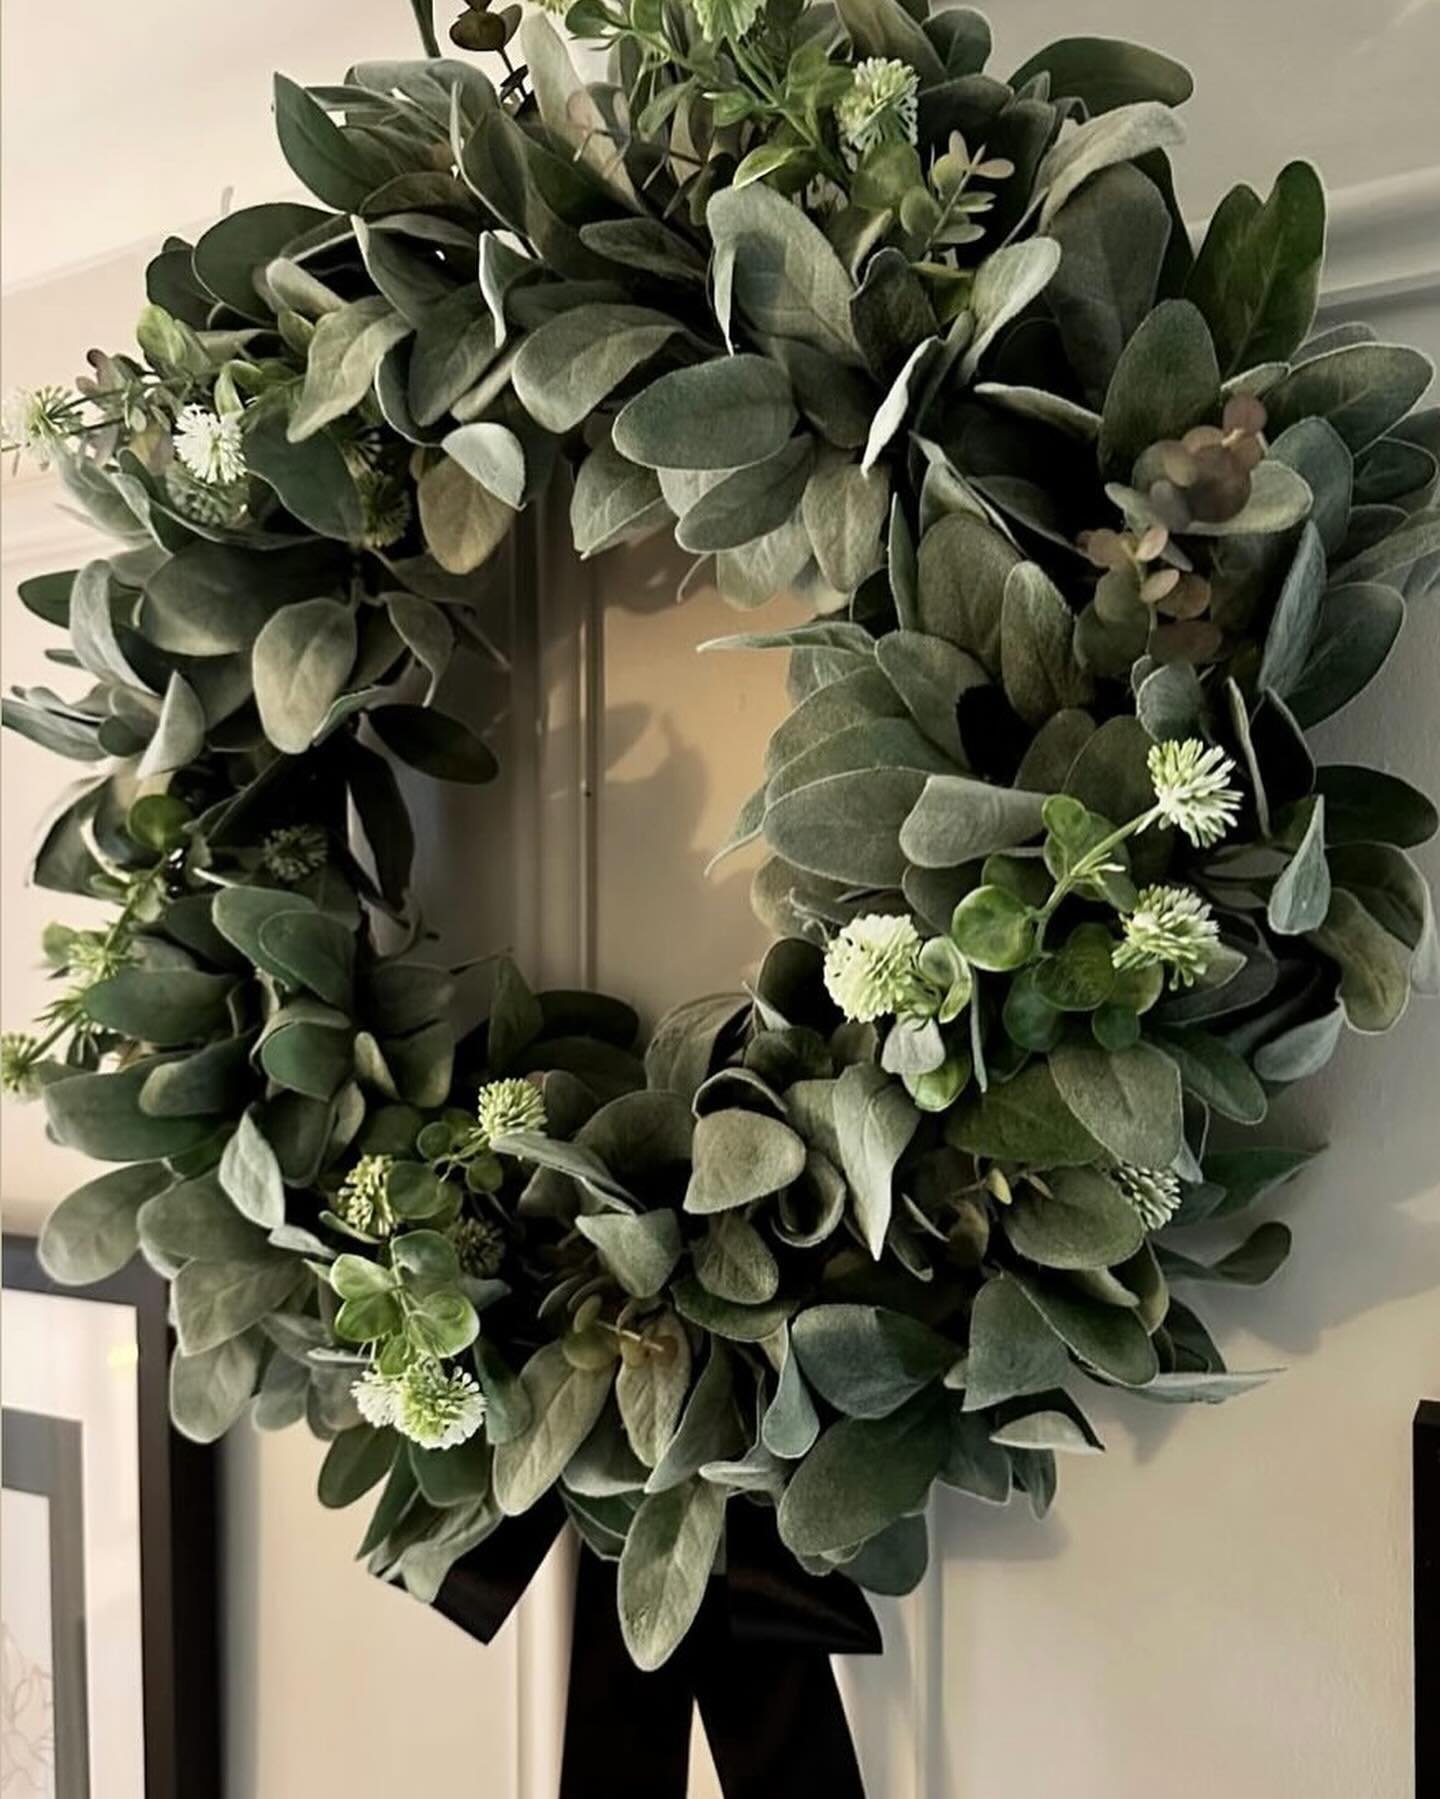 Monday sunshine, these pics from Gail @gail_home_ are stunning the most beautiful hallway finished off with my lambs ear wreath. It&rsquo;s perfect. Xx #monday #sunshine #artificialflowers #artificialwreath #fauxwreath